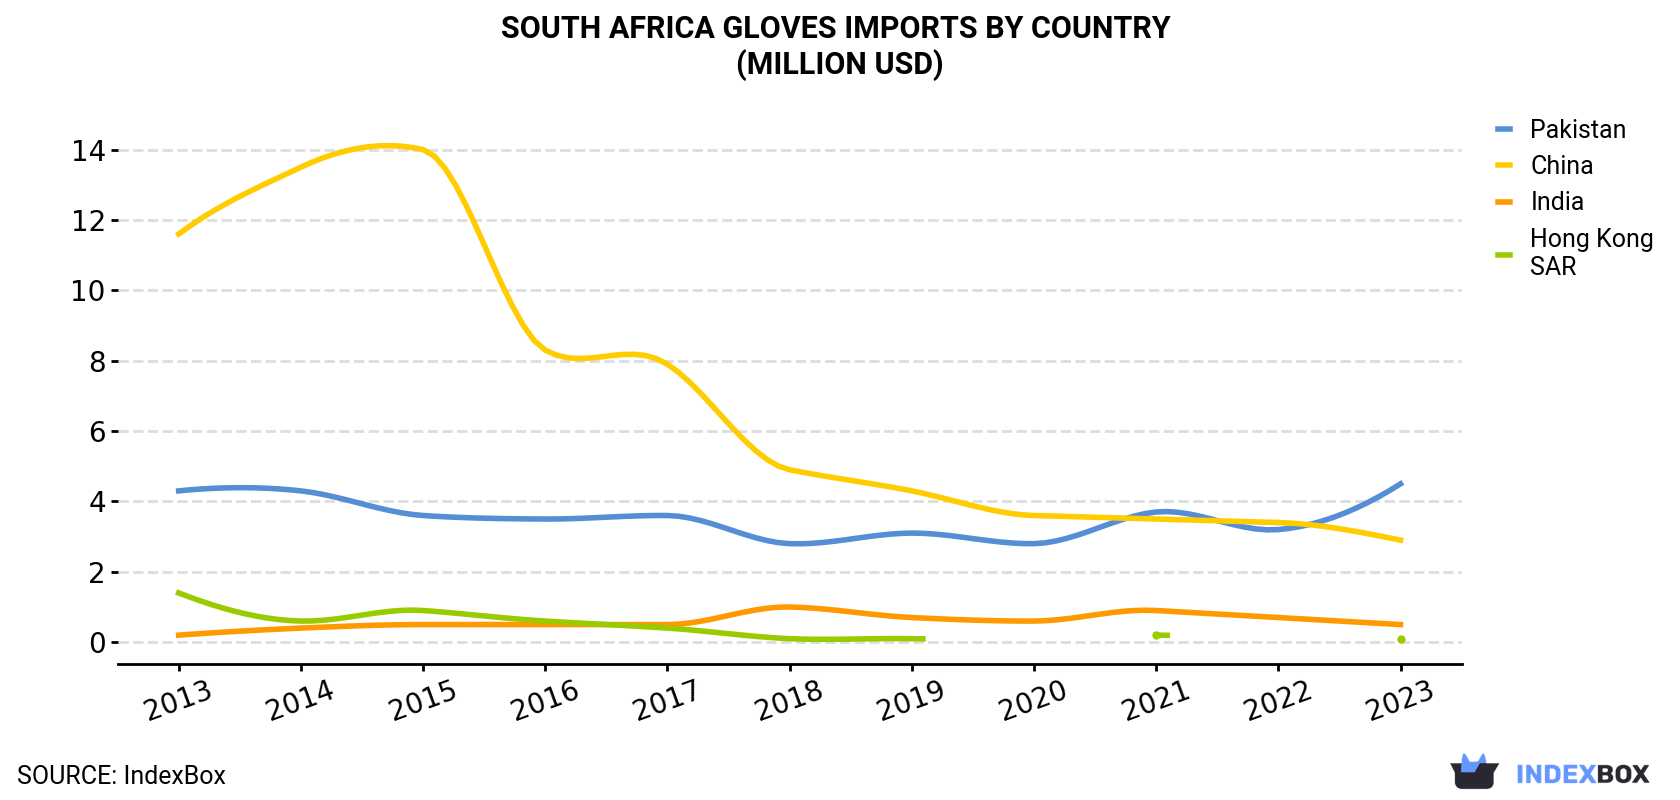 South Africa Gloves Imports By Country (Million USD)